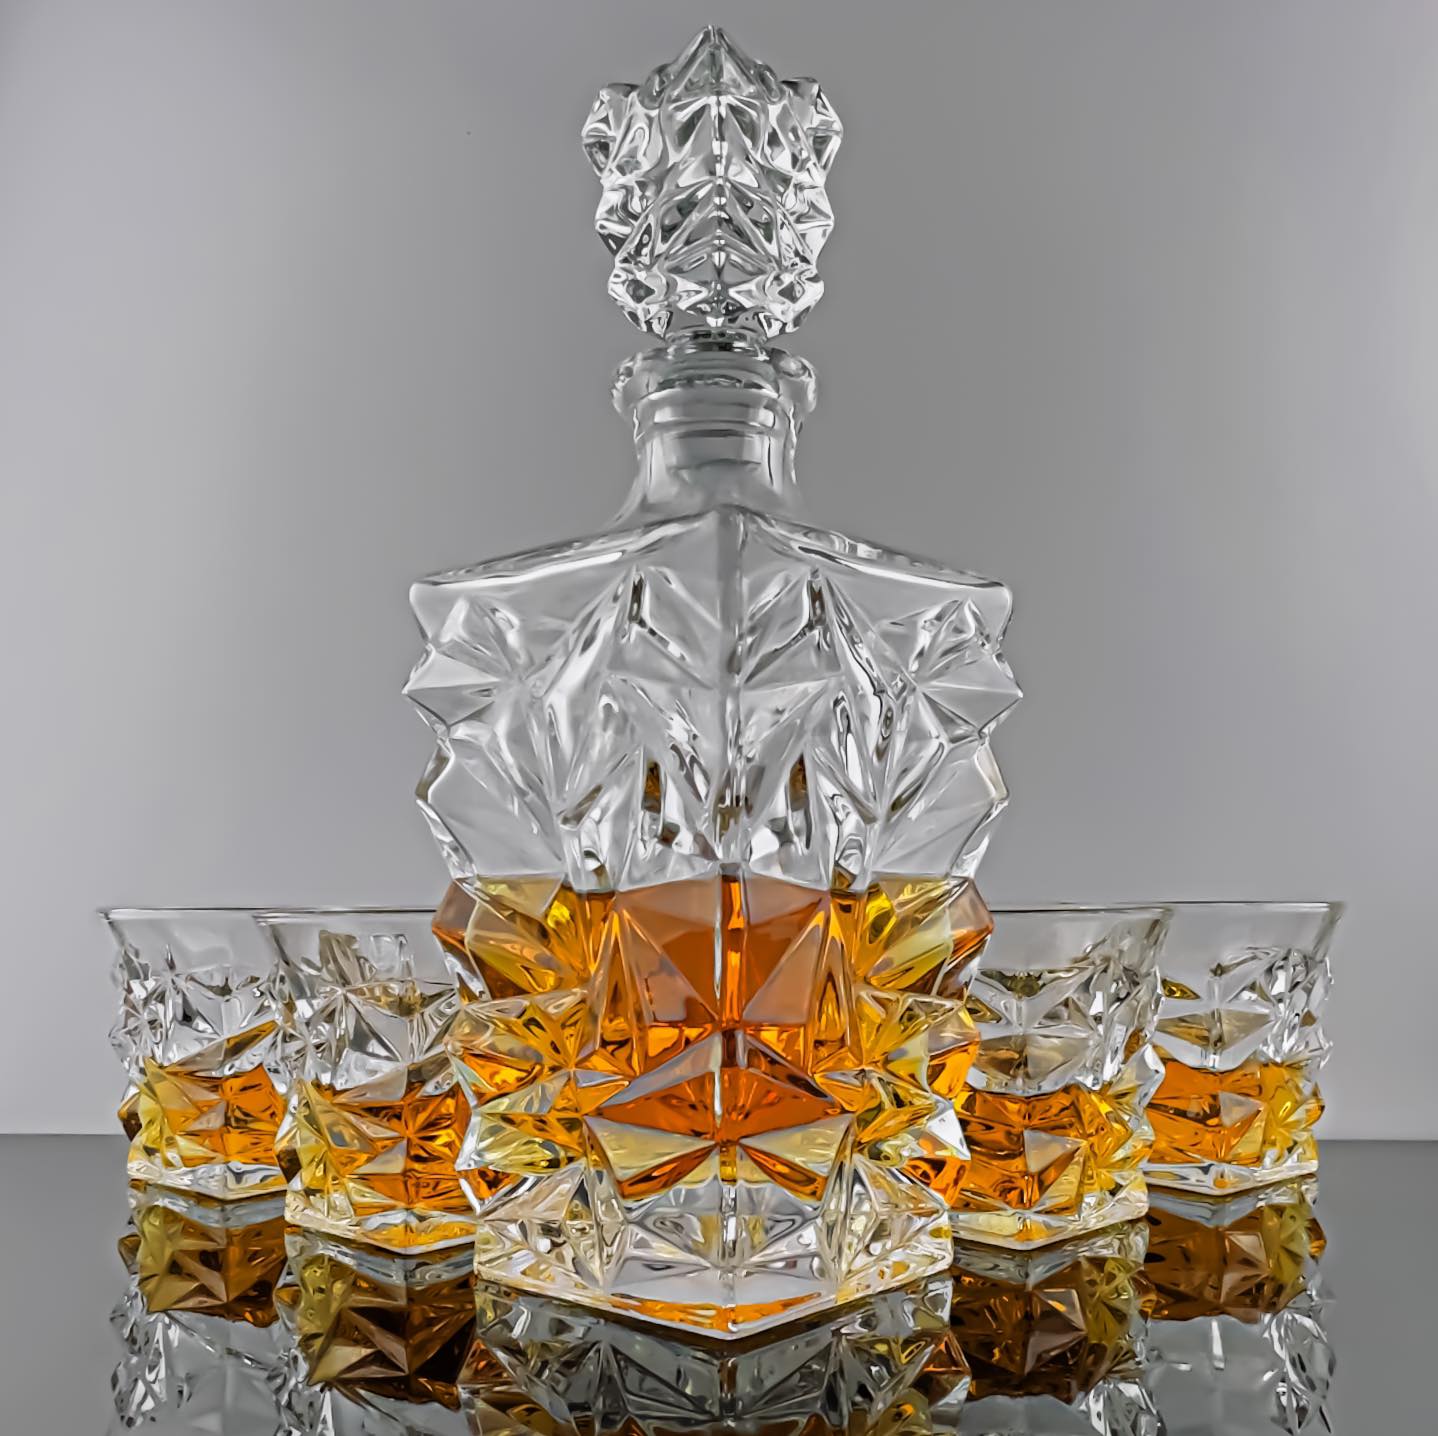 Whiskey Glasses and Decanters